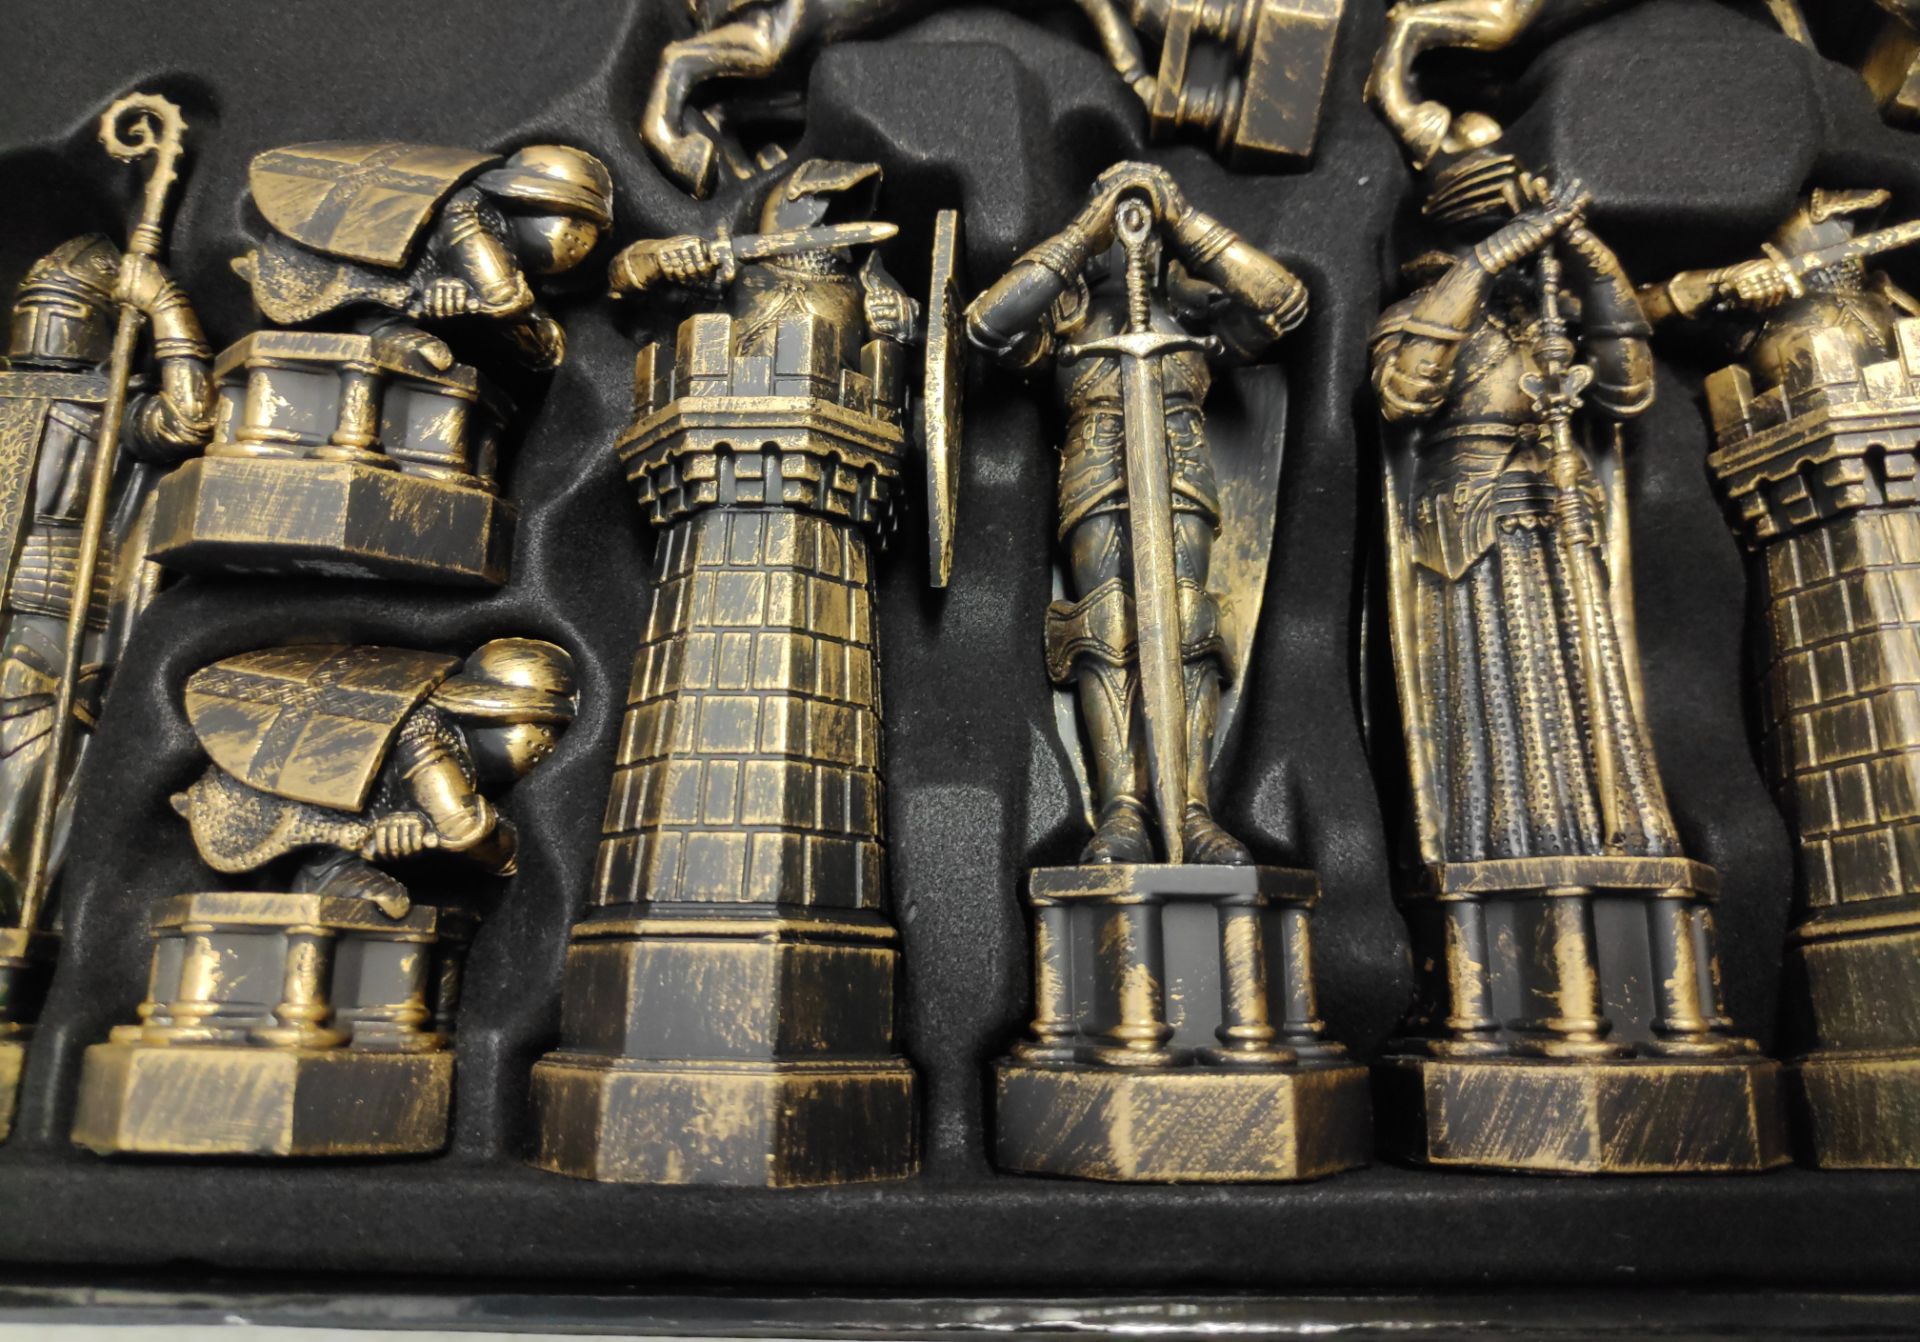 1 x The Noble Collection Harry Potter Final Challenge Limited Edition Chess Set - Image 6 of 20